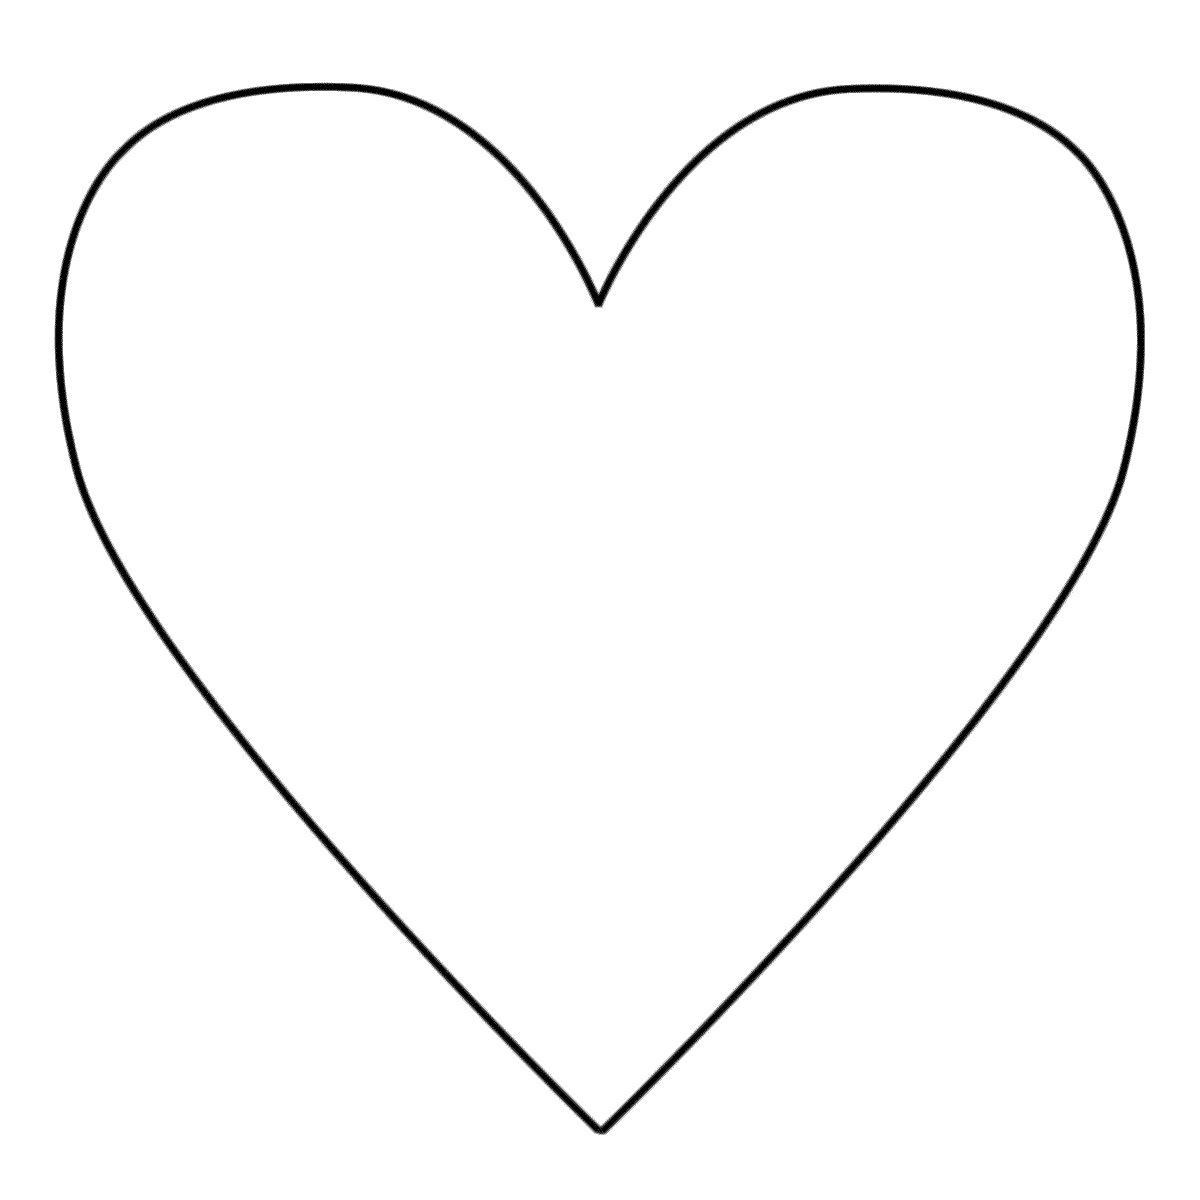 heart coloring page free printable heart coloring pages for kids cool2bkids page heart coloring 